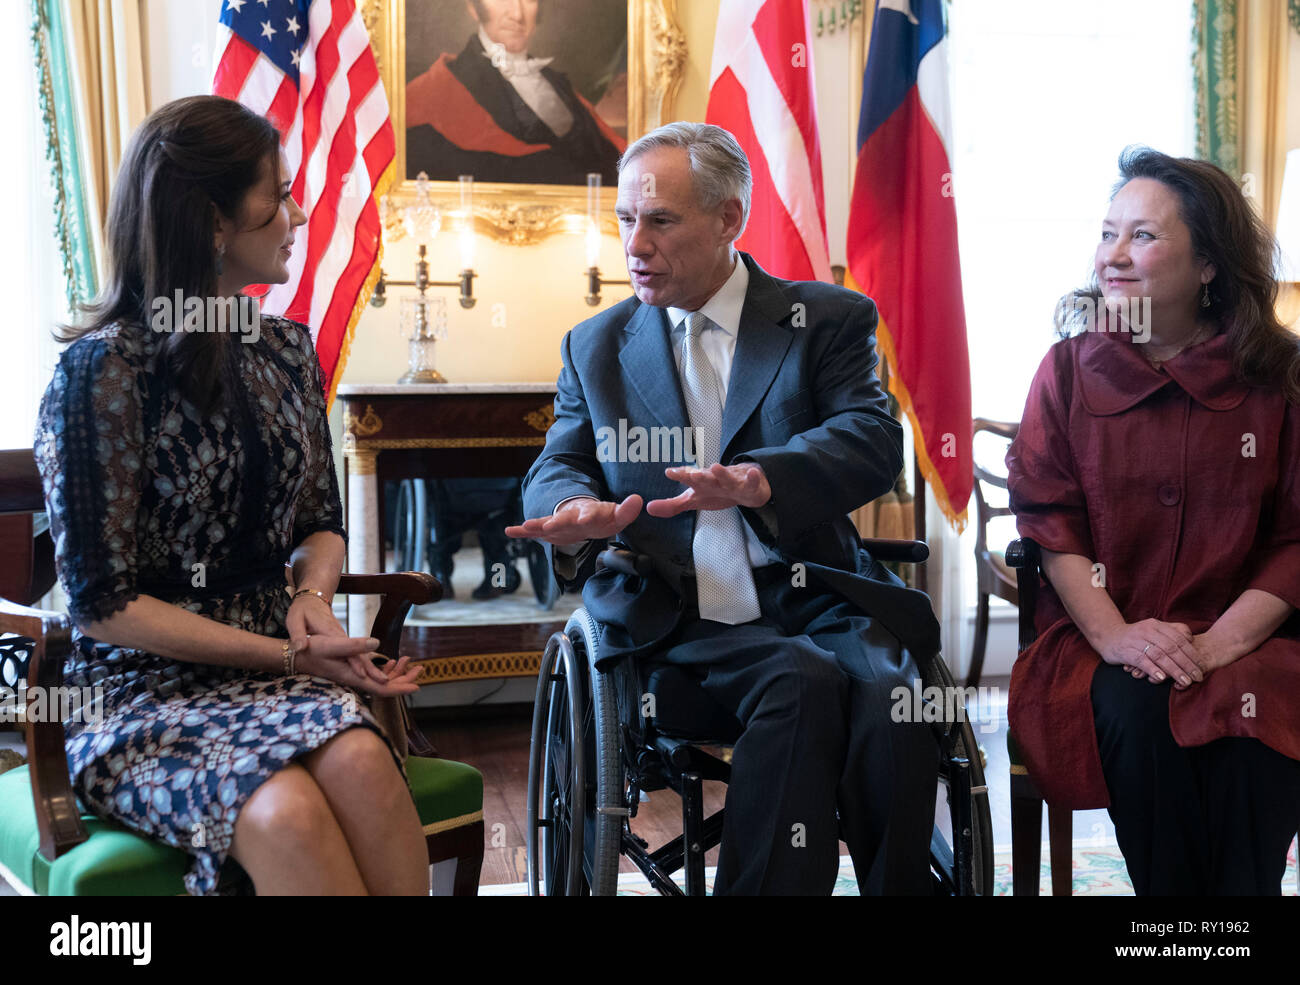 Mary, Crown Princess of Denmark, left, visits with Texas governor Greg Abbott, center, and wife Cecilia during a stop at the Texas Governor's Mansion in Austin. The Crown Princess is on a three-day Texas swing that includes appearances at Austin's SXSW Conference. Stock Photo